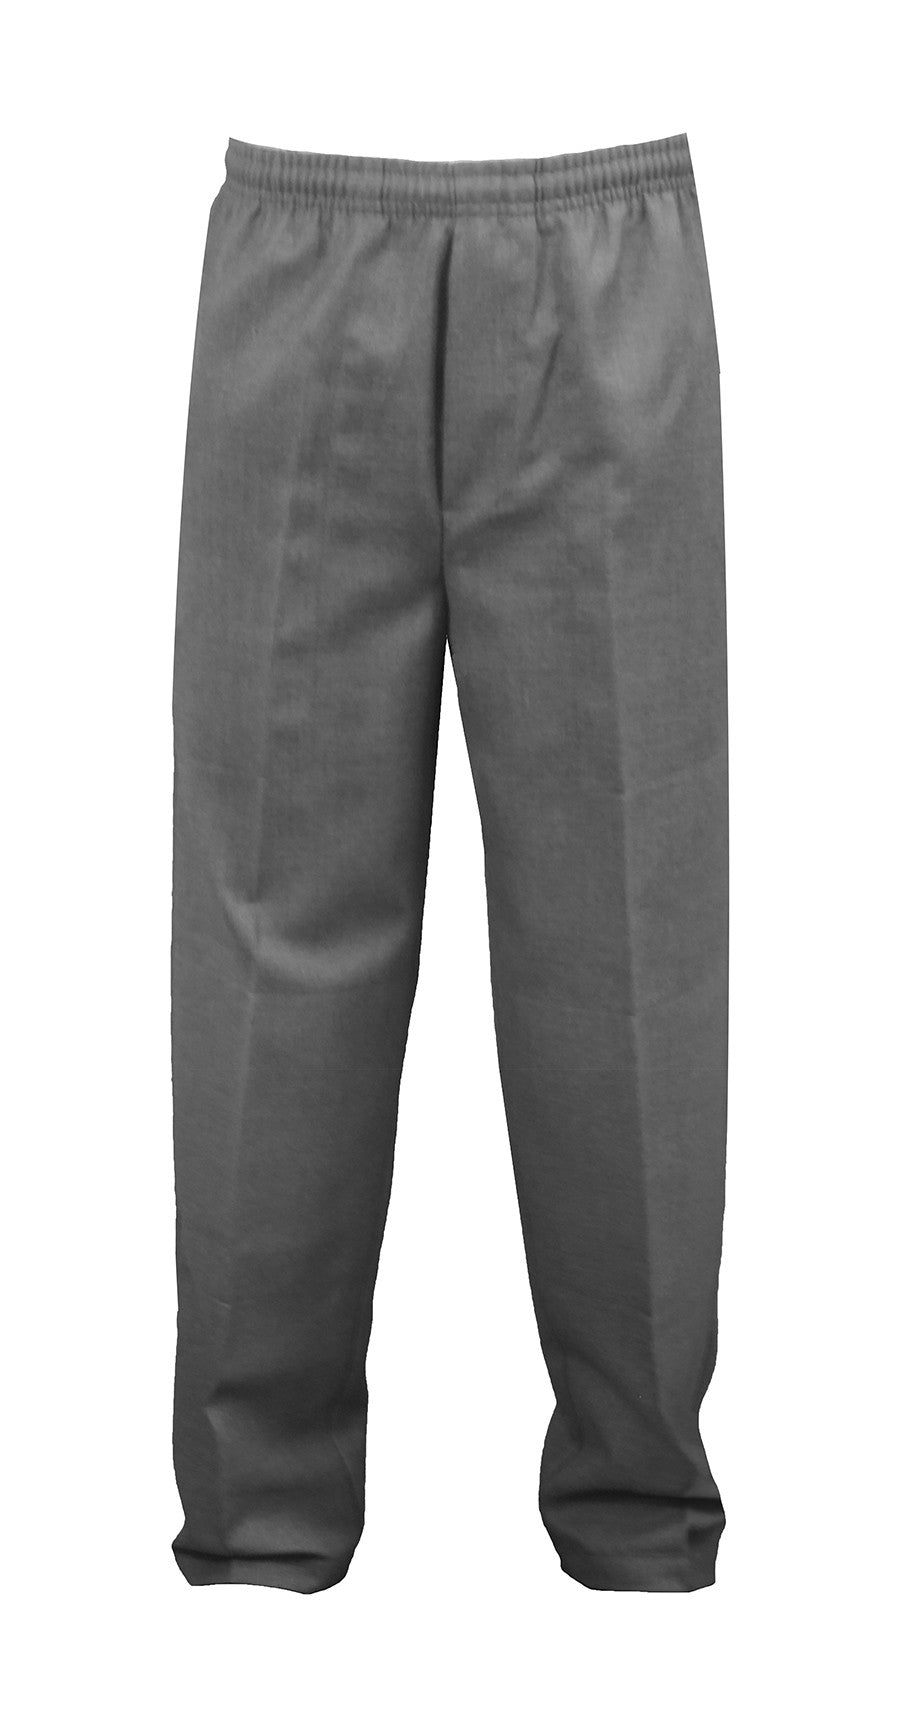 GREY RUGBY PANTS, POLY/COTTON, CHILD